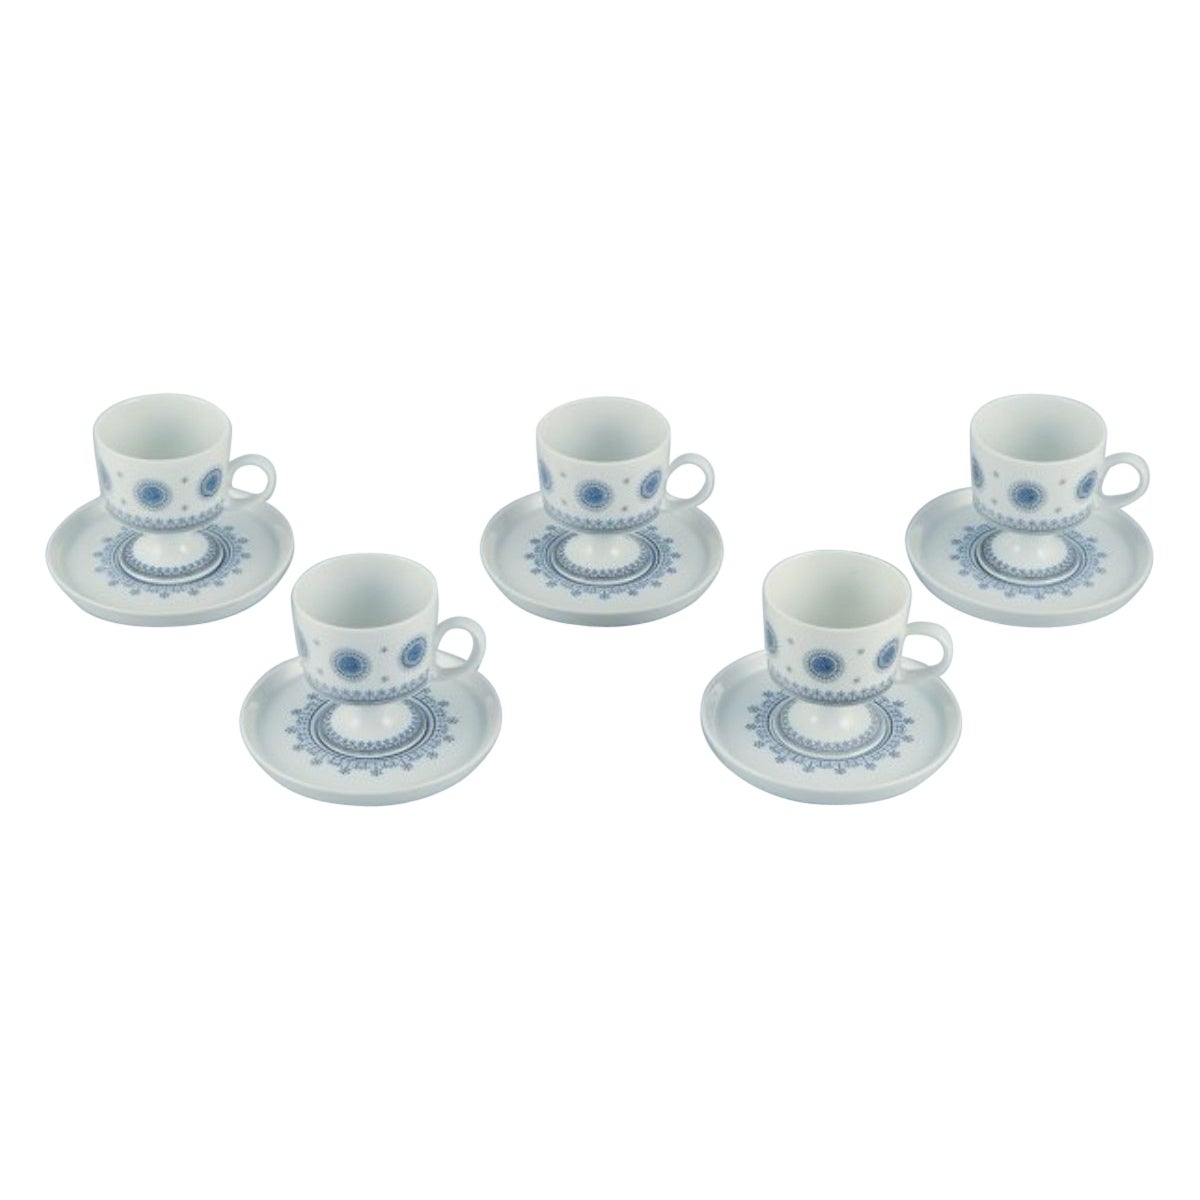 Tapio Wirkkala for Rosenthal Studio-line. Set of five demitasse cups and saucers For Sale